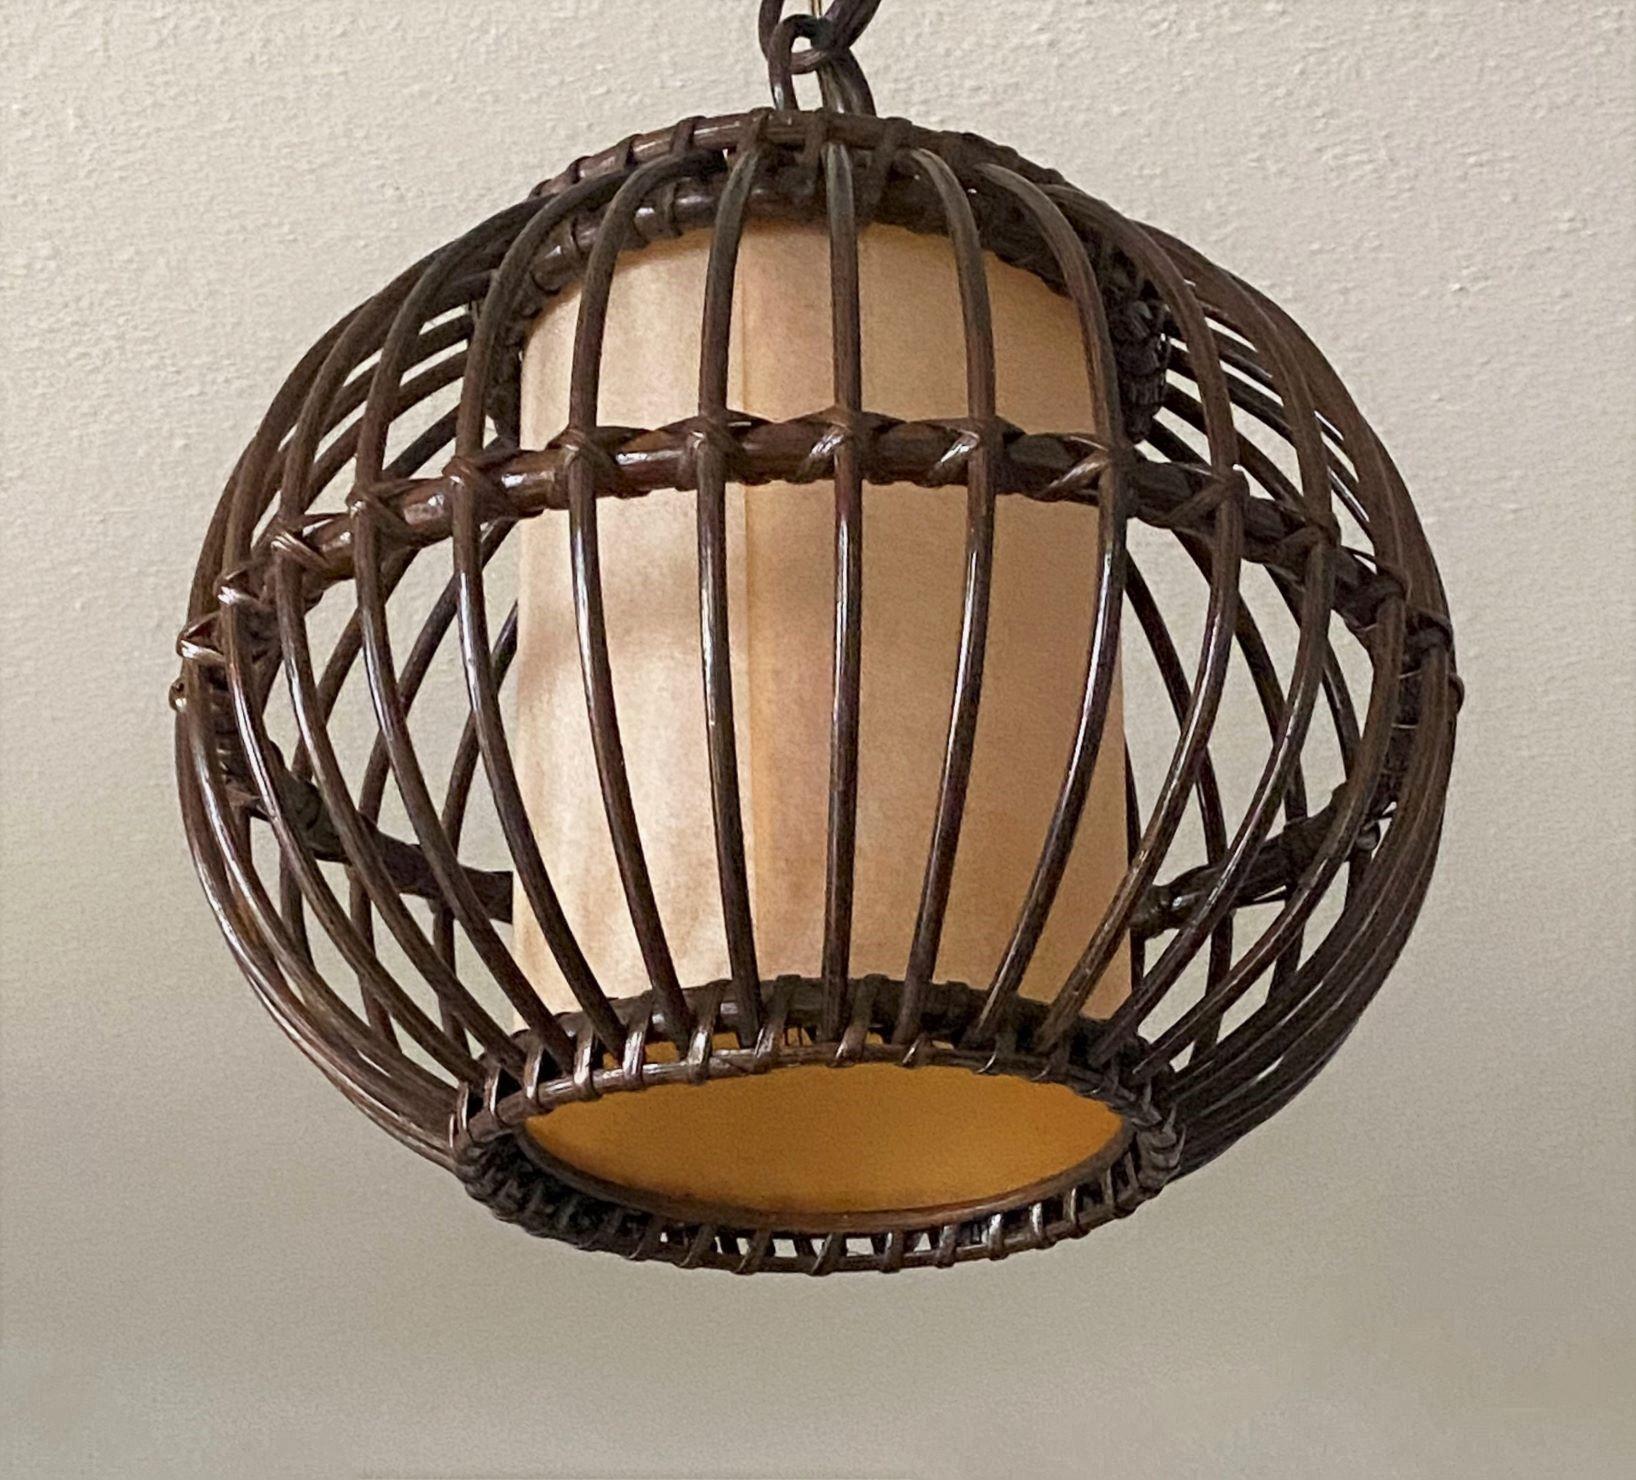 Handcrafted Rattan Wicker Globe Pendant with Perchament Lamp Shade, Spain, 1950s In Good Condition For Sale In Frankfurt am Main, DE